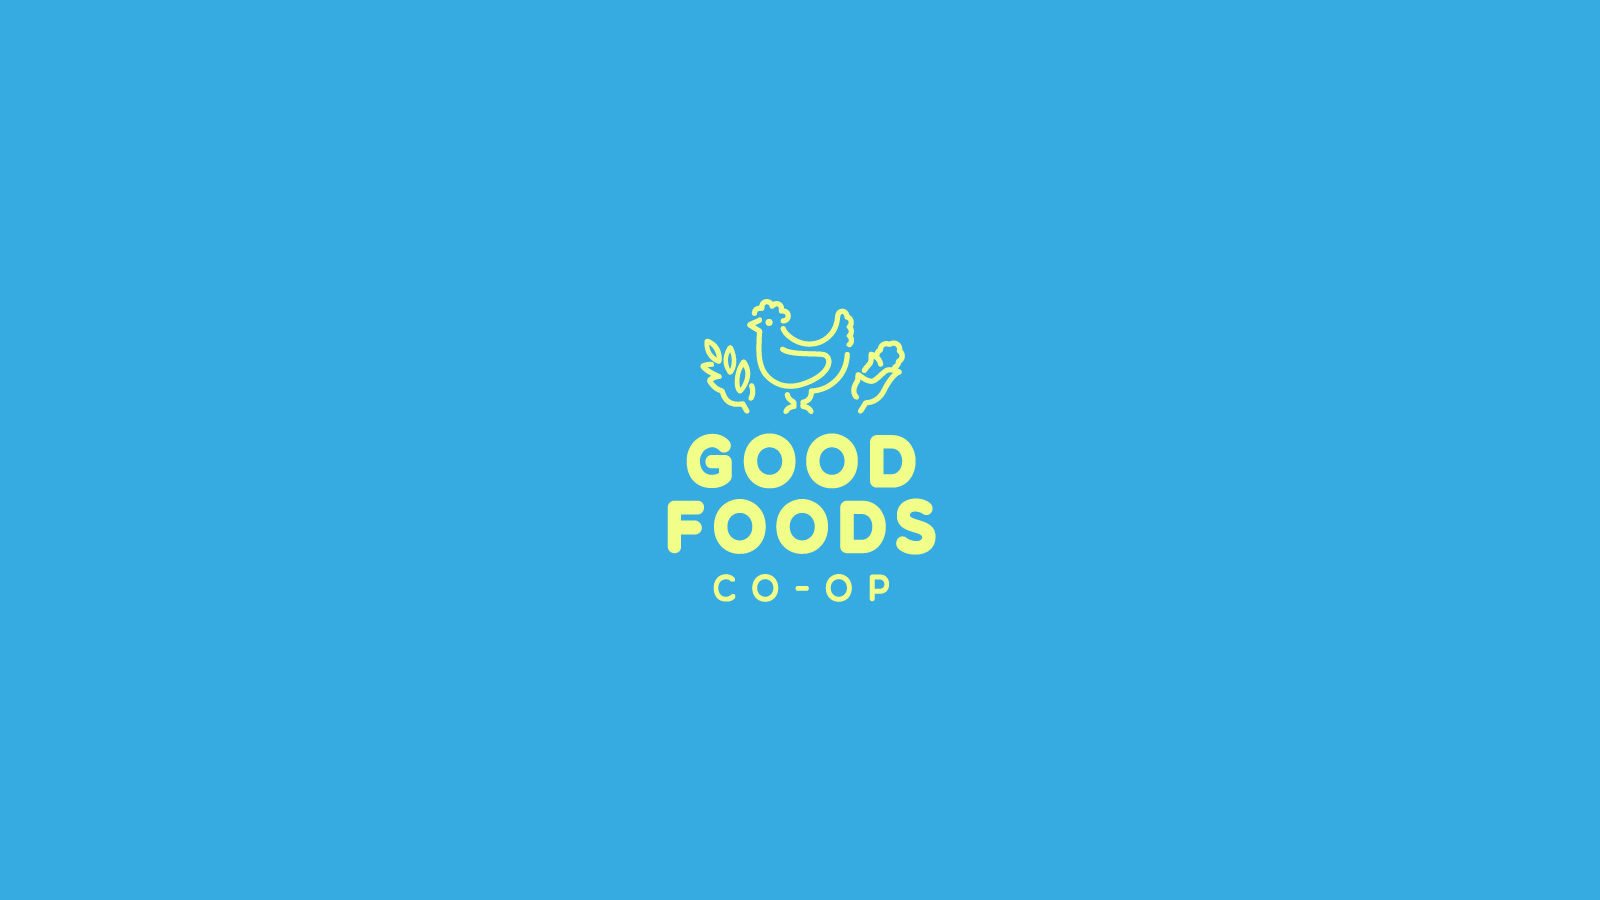 A Brand Identity for Good Foods Co-op by Bullhorn Creative